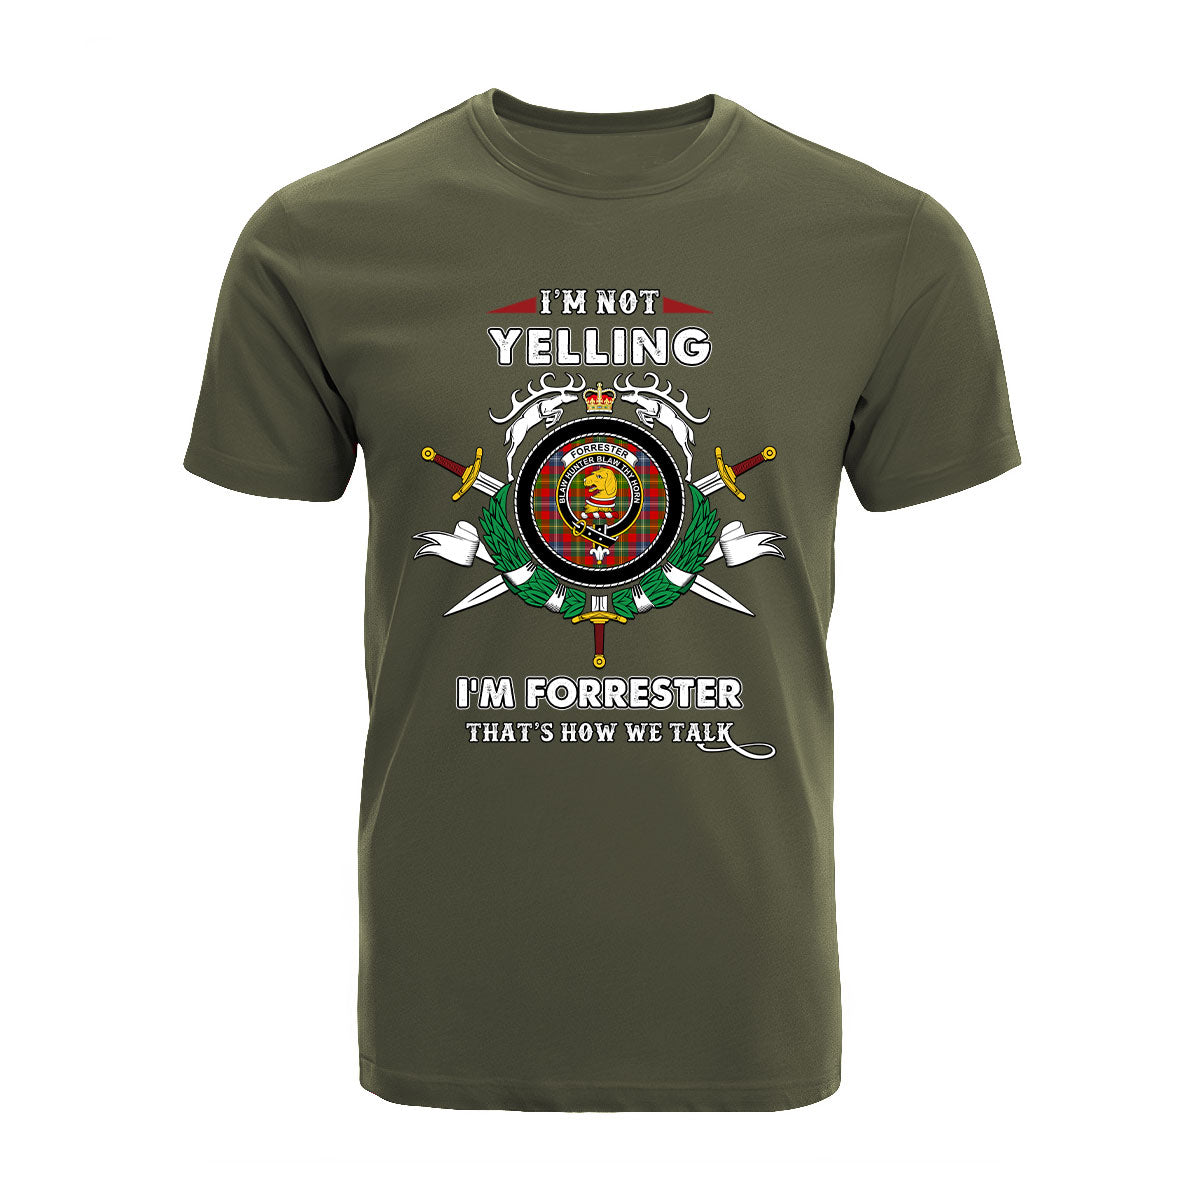 Forrester Tartan Crest T-shirt - I'm not yelling style